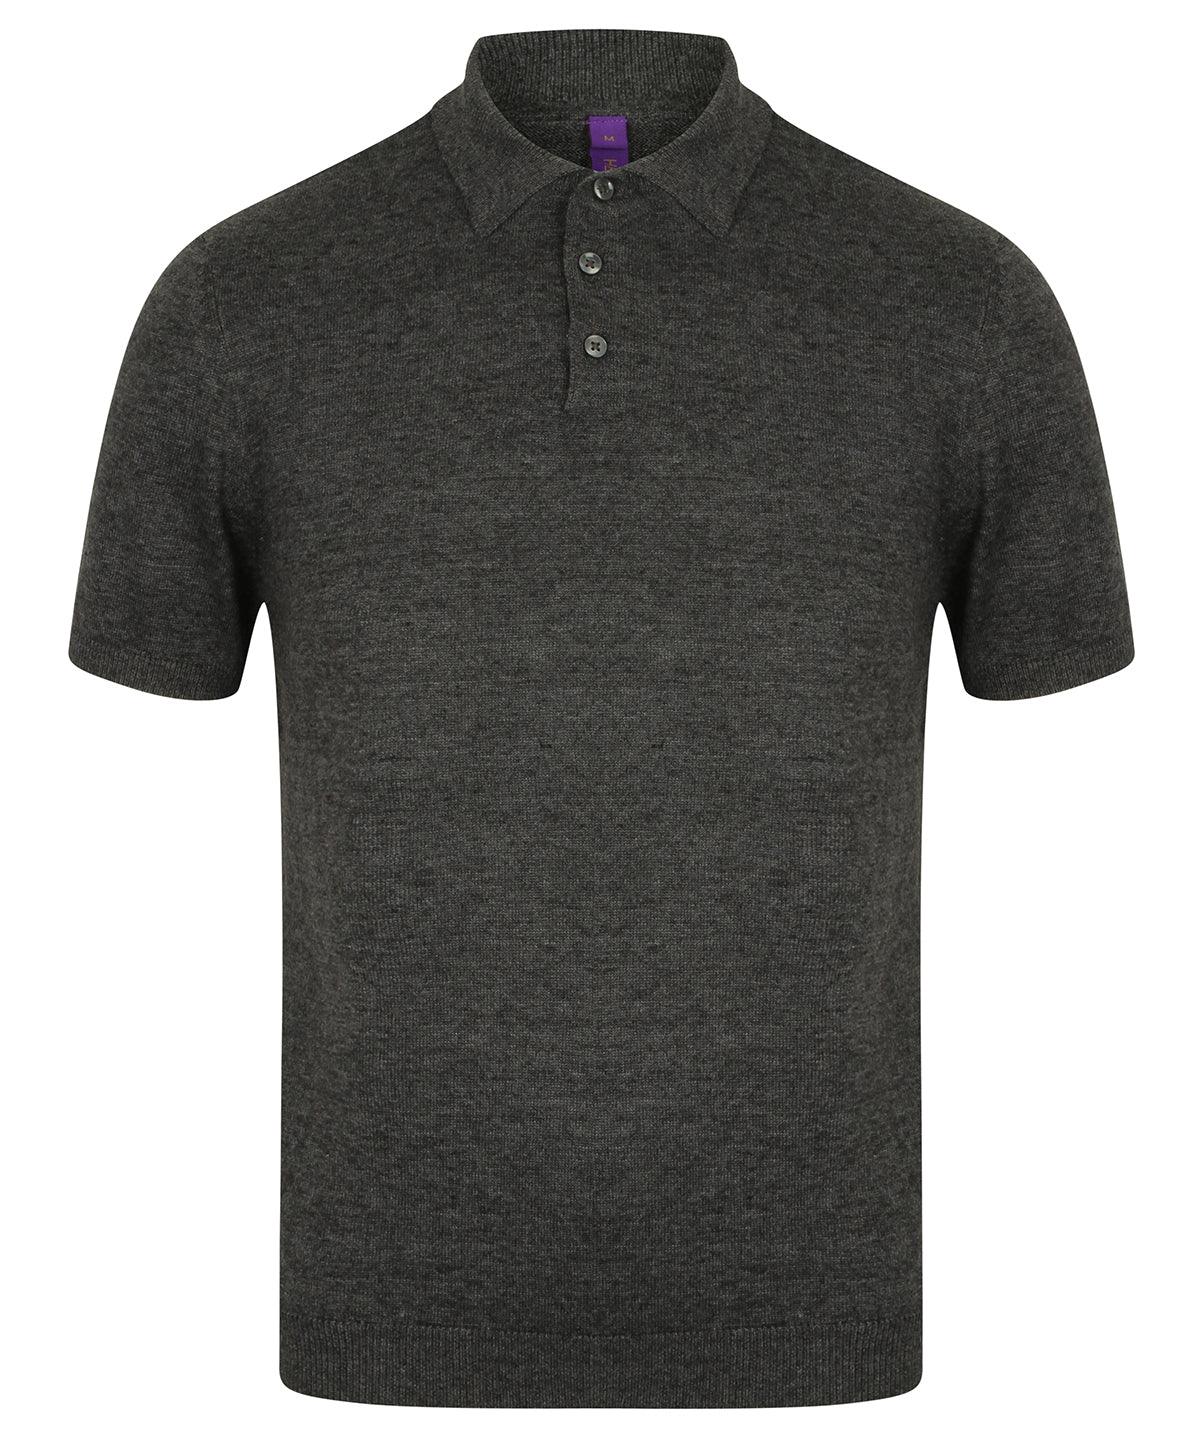 Grey Marl - Knitted short sleeve top Polos Henbury Knitwear, Polos & Casual, Rebrandable, Sale Schoolwear Centres